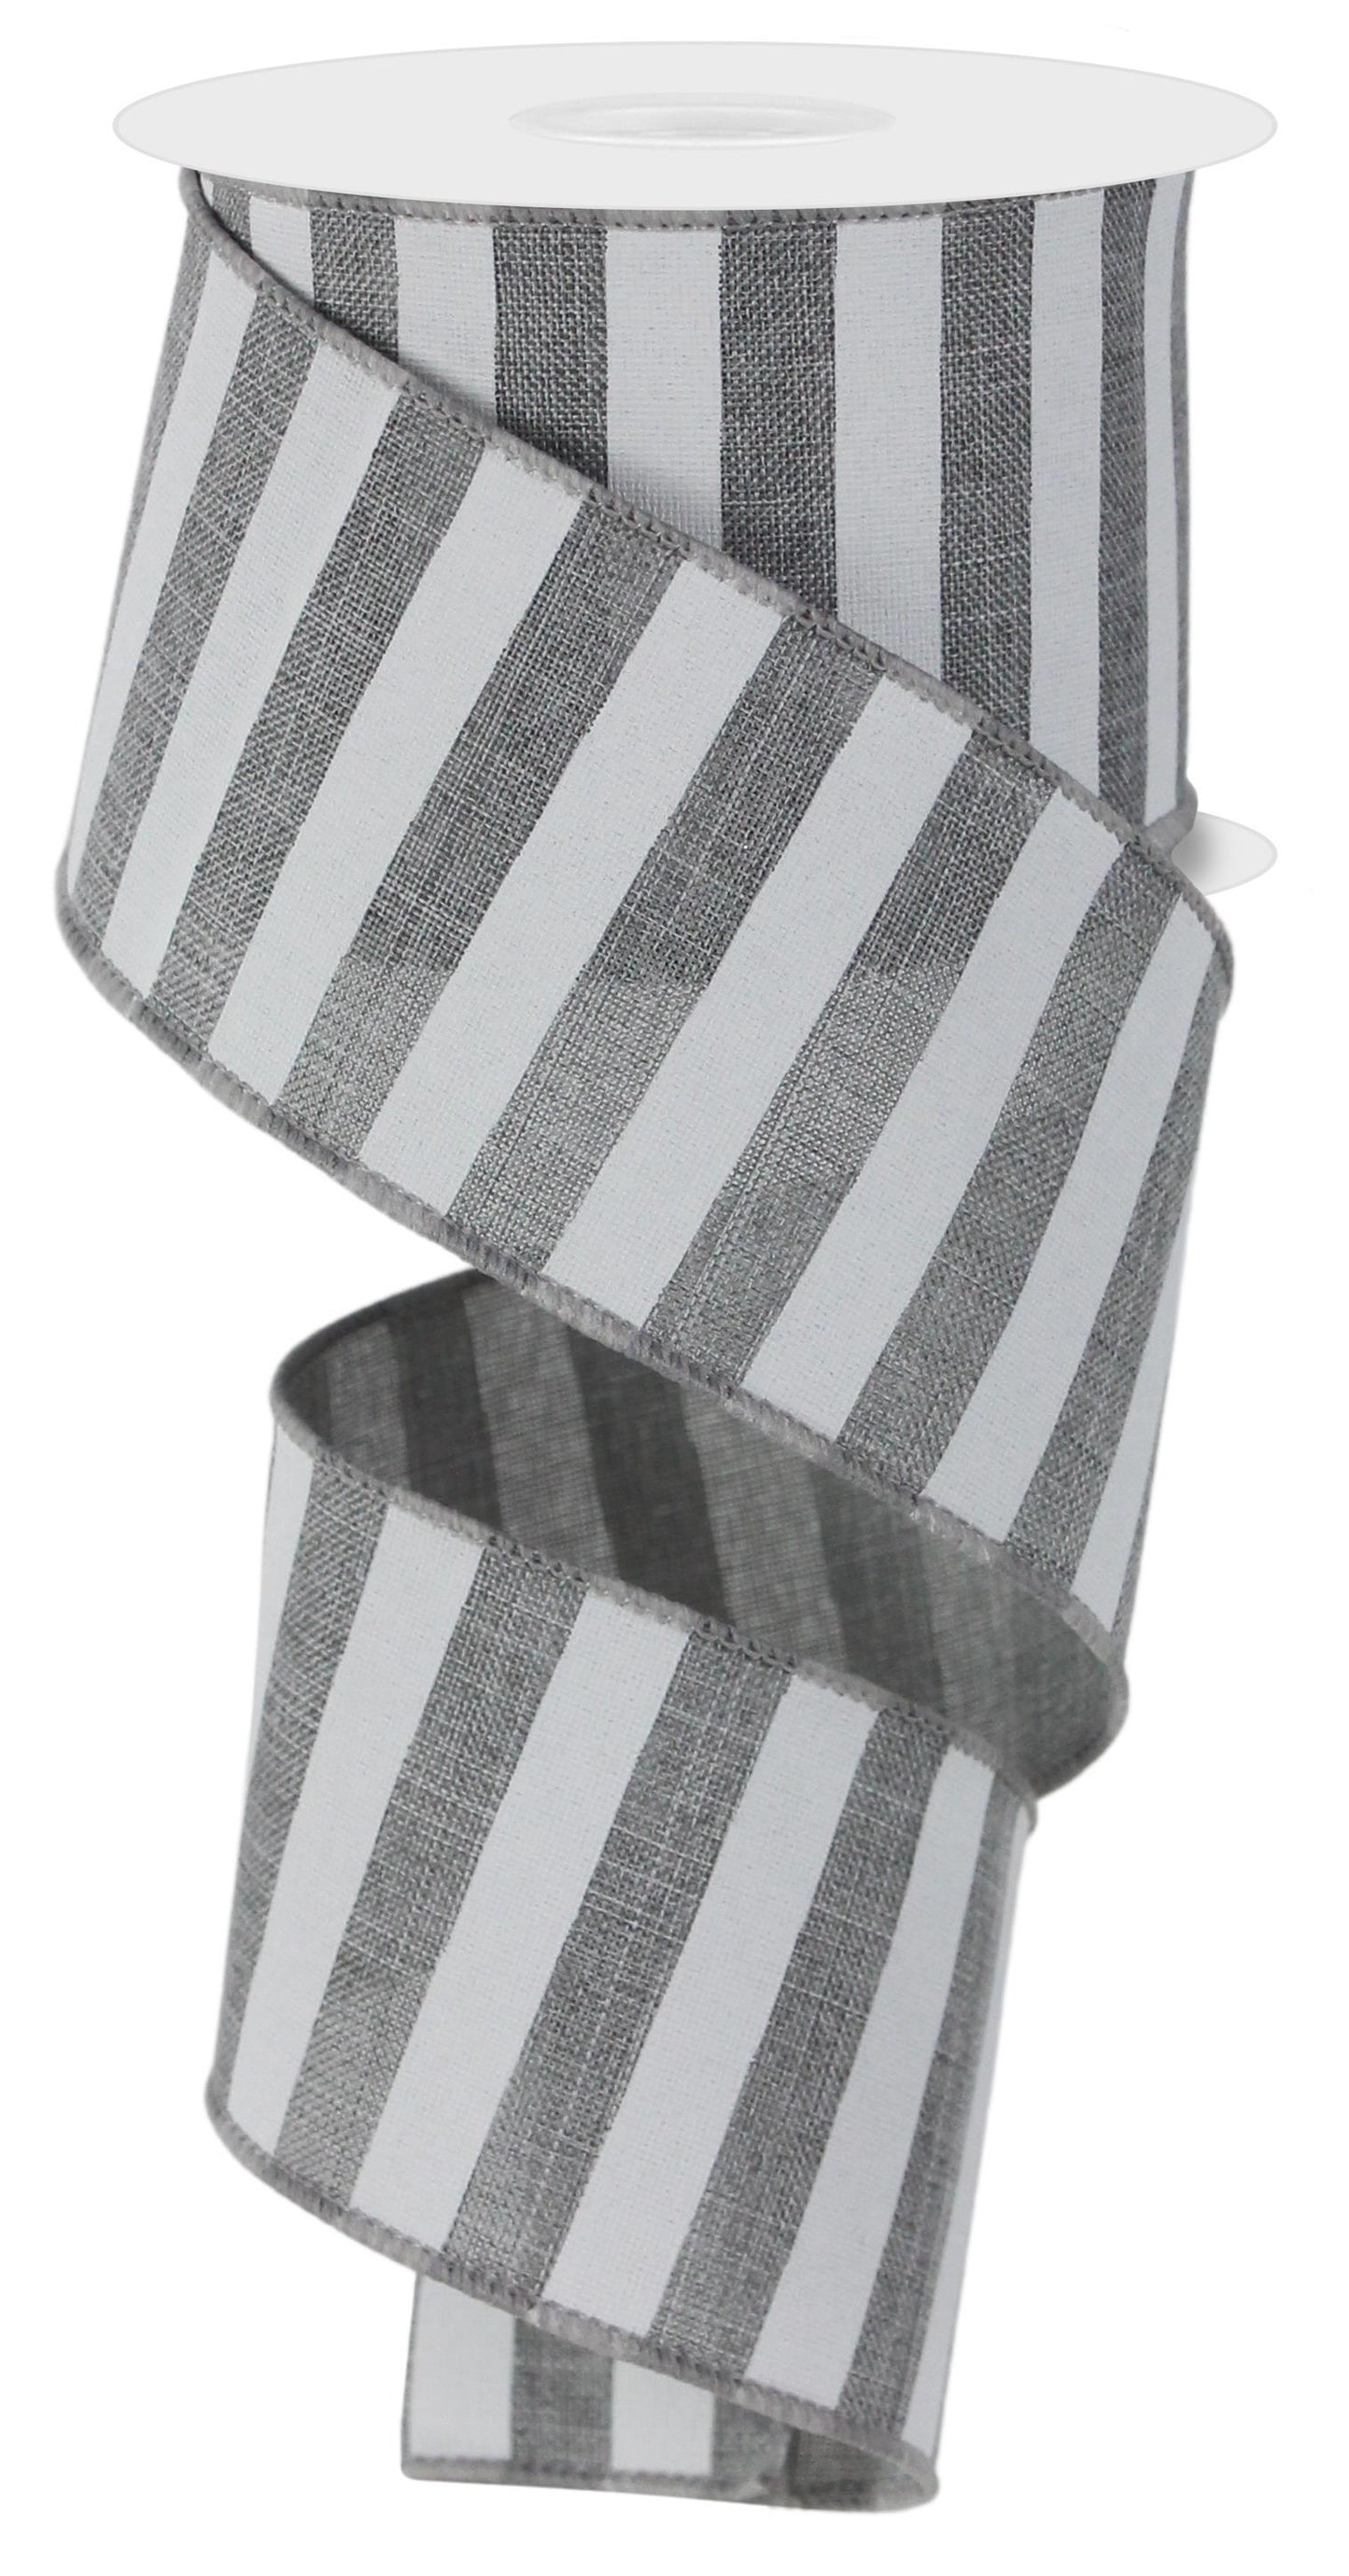 Wired Ribbon * Horizontal Stripe * Grey and White Canvas * 2.5" x 10 Yards * RX91495X